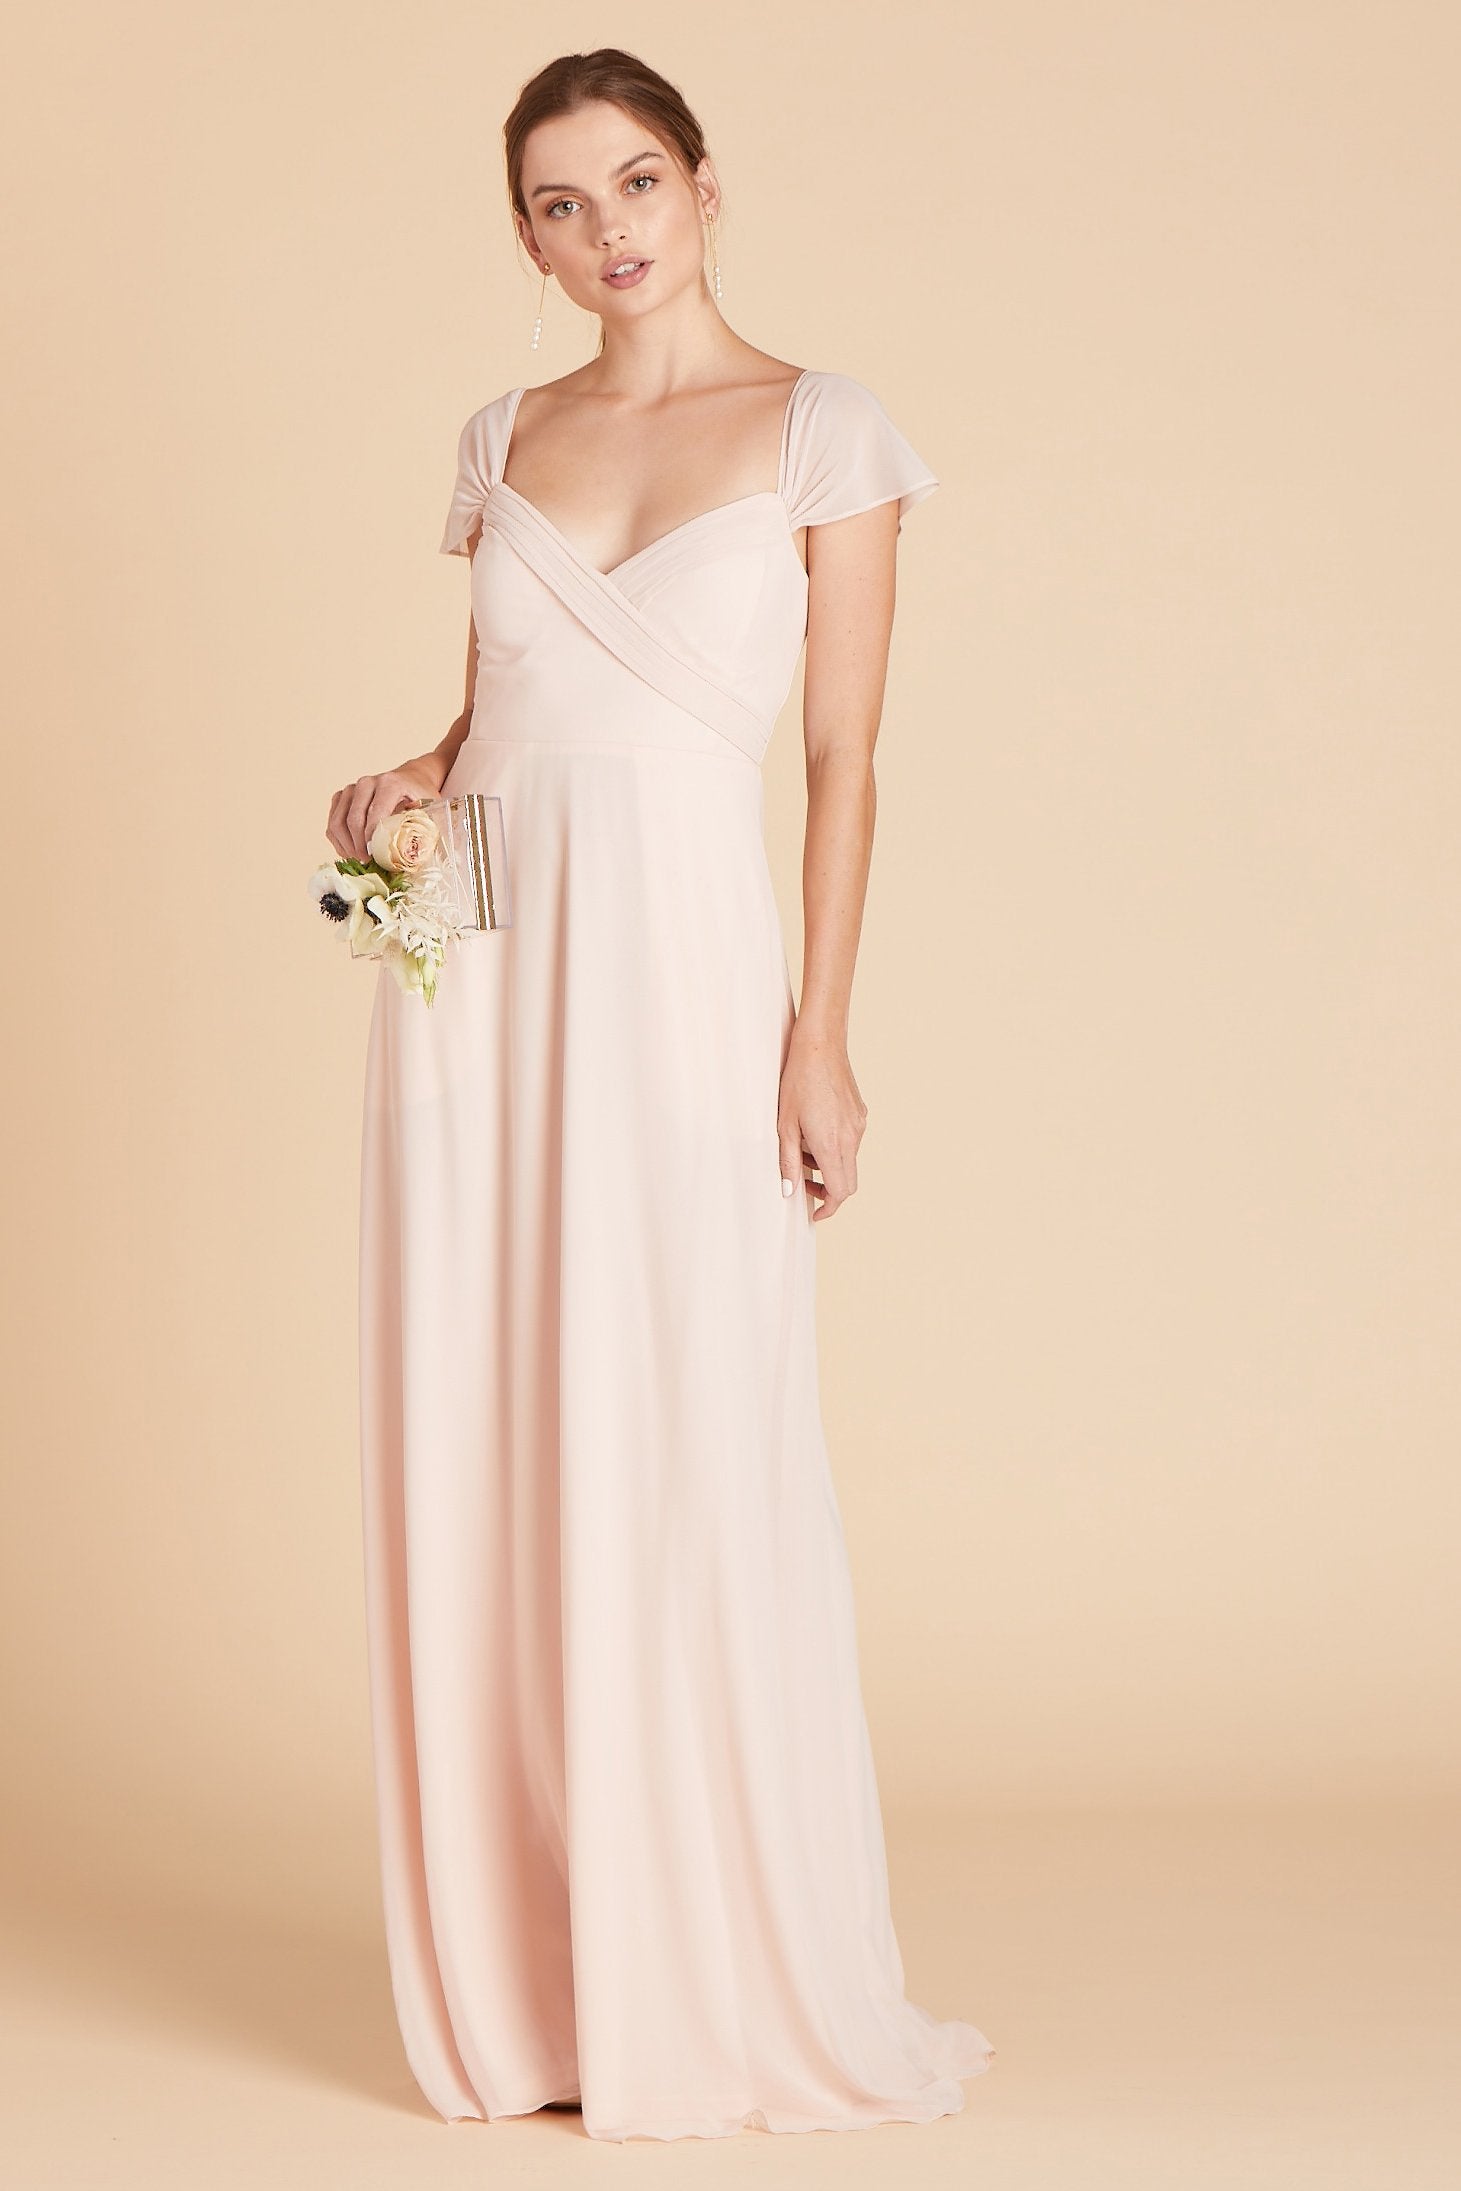 Spence convertible bridesmaid dress in pale blush chiffon by Birdy Grey, front view